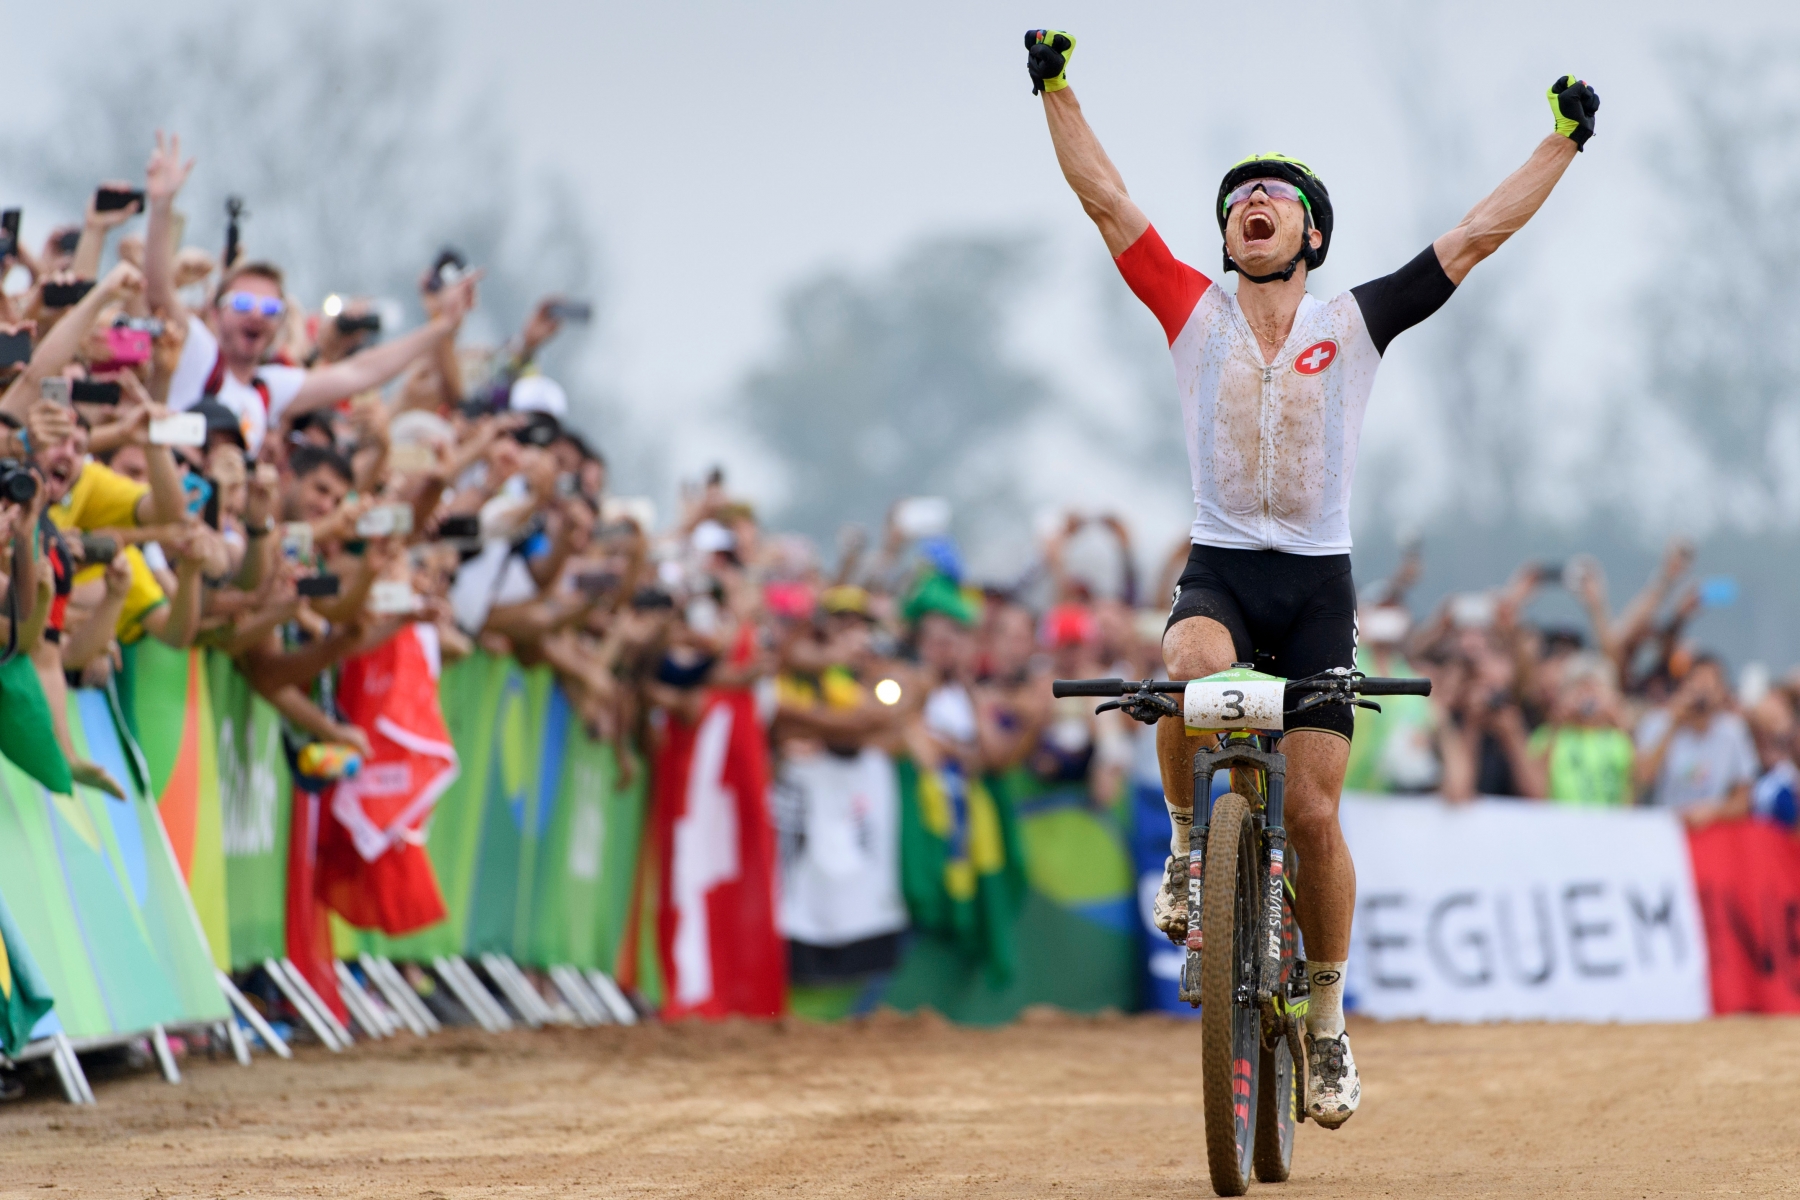 Gold medalist Nino Schurter of Switzerland celebrates as he cross the finish line of the men's MTB cross country race in the Mountain Bike Center in Deodoro at the Rio 2016 Olympic Summer Games in Rio de Janeiro, Brazil, on Sunday, August 21, 2016. (KEYSTONE/Laurent Gillieron) BRAZIL RIO OLYMPICS 2016 CYCLING MTB